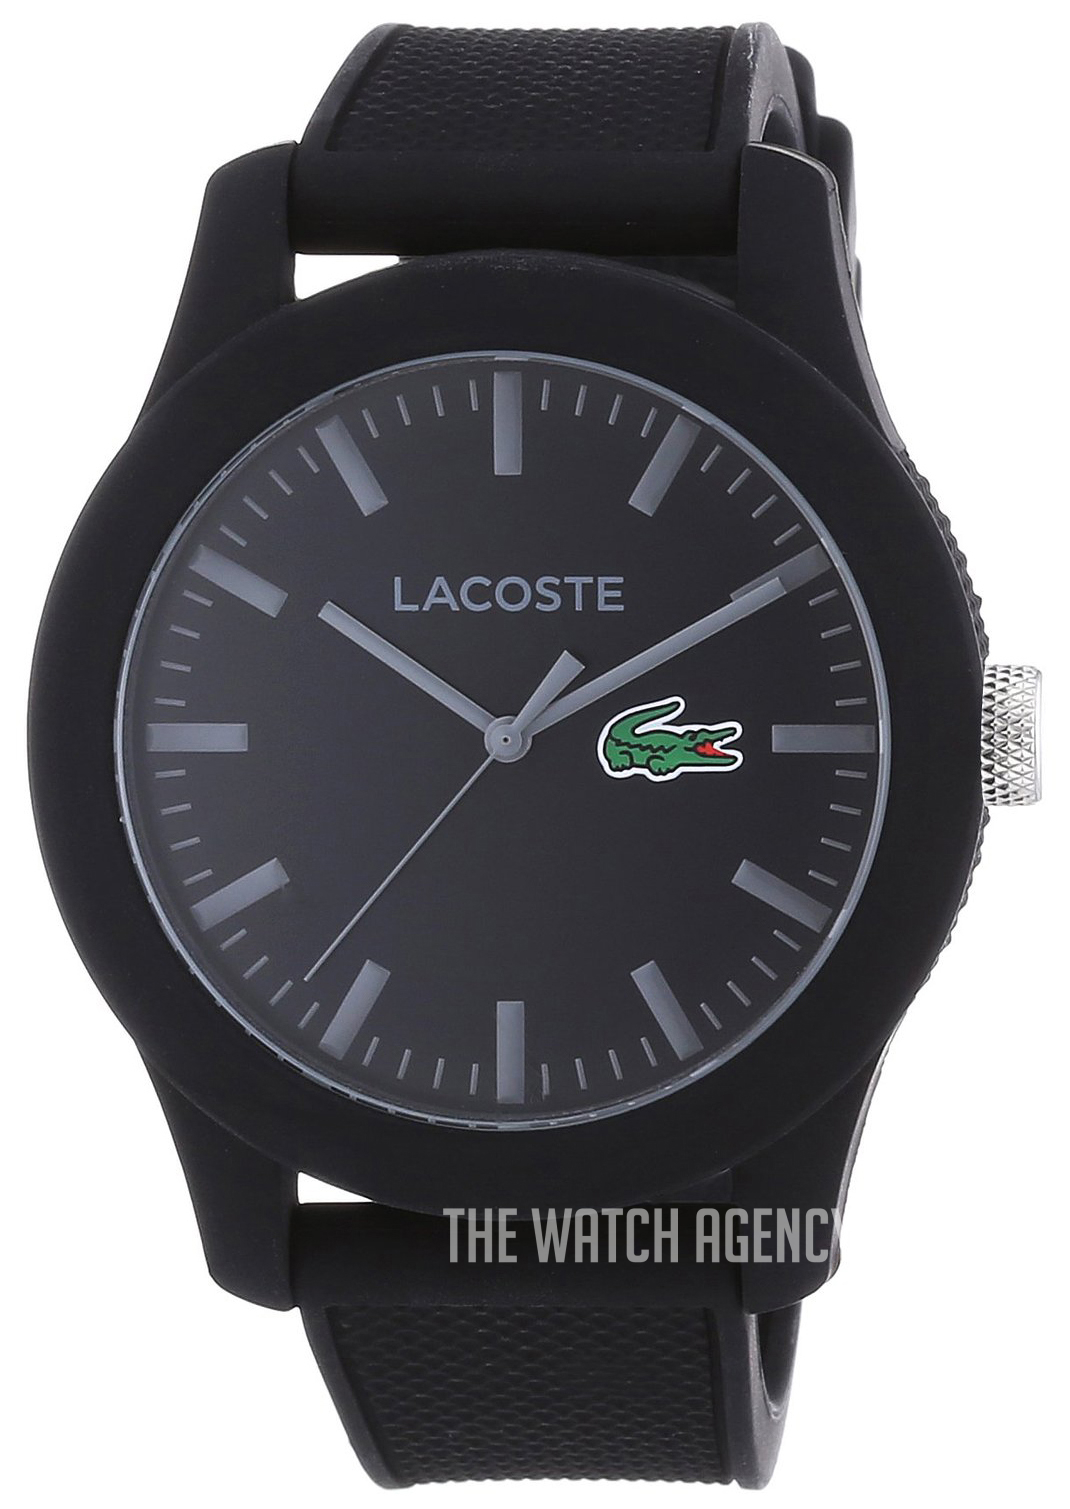 2010766 Lacoste | TheWatchAgency™